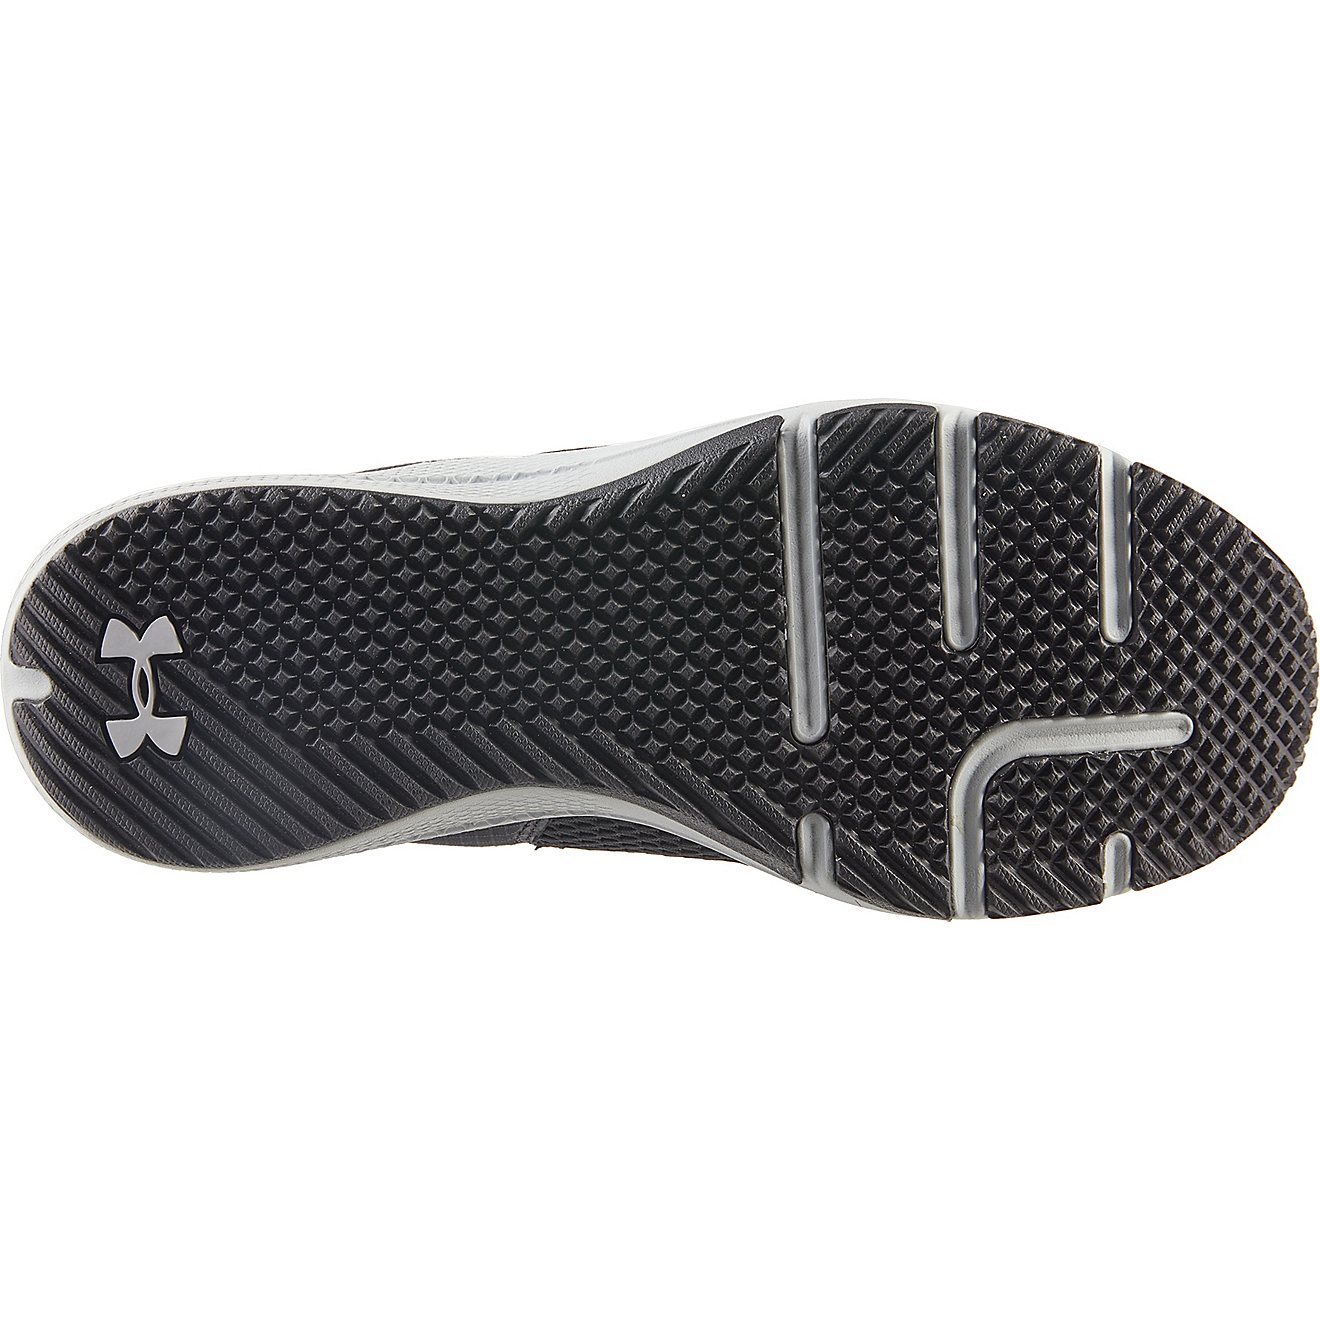 Under Armour Men's Charged Focus Training Shoes | Academy